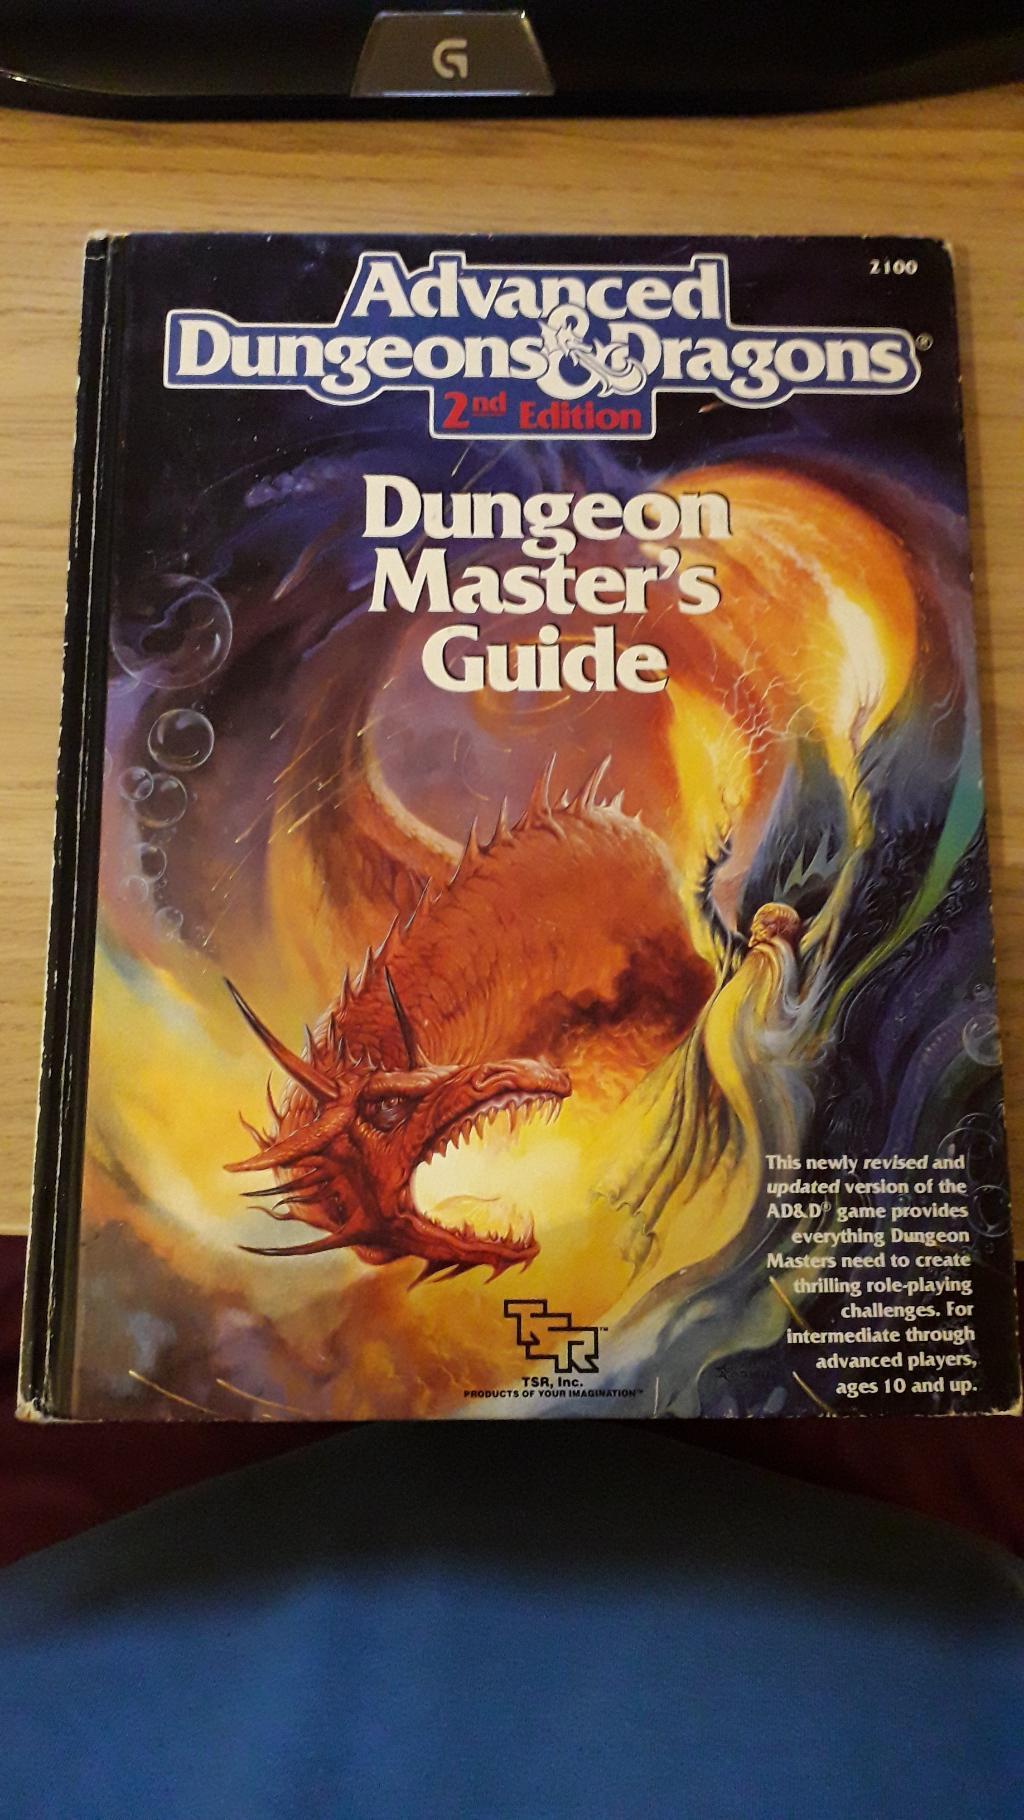 Advanced Dungeons & Dragons - 2nd Edition - Dungeon Master's Guide